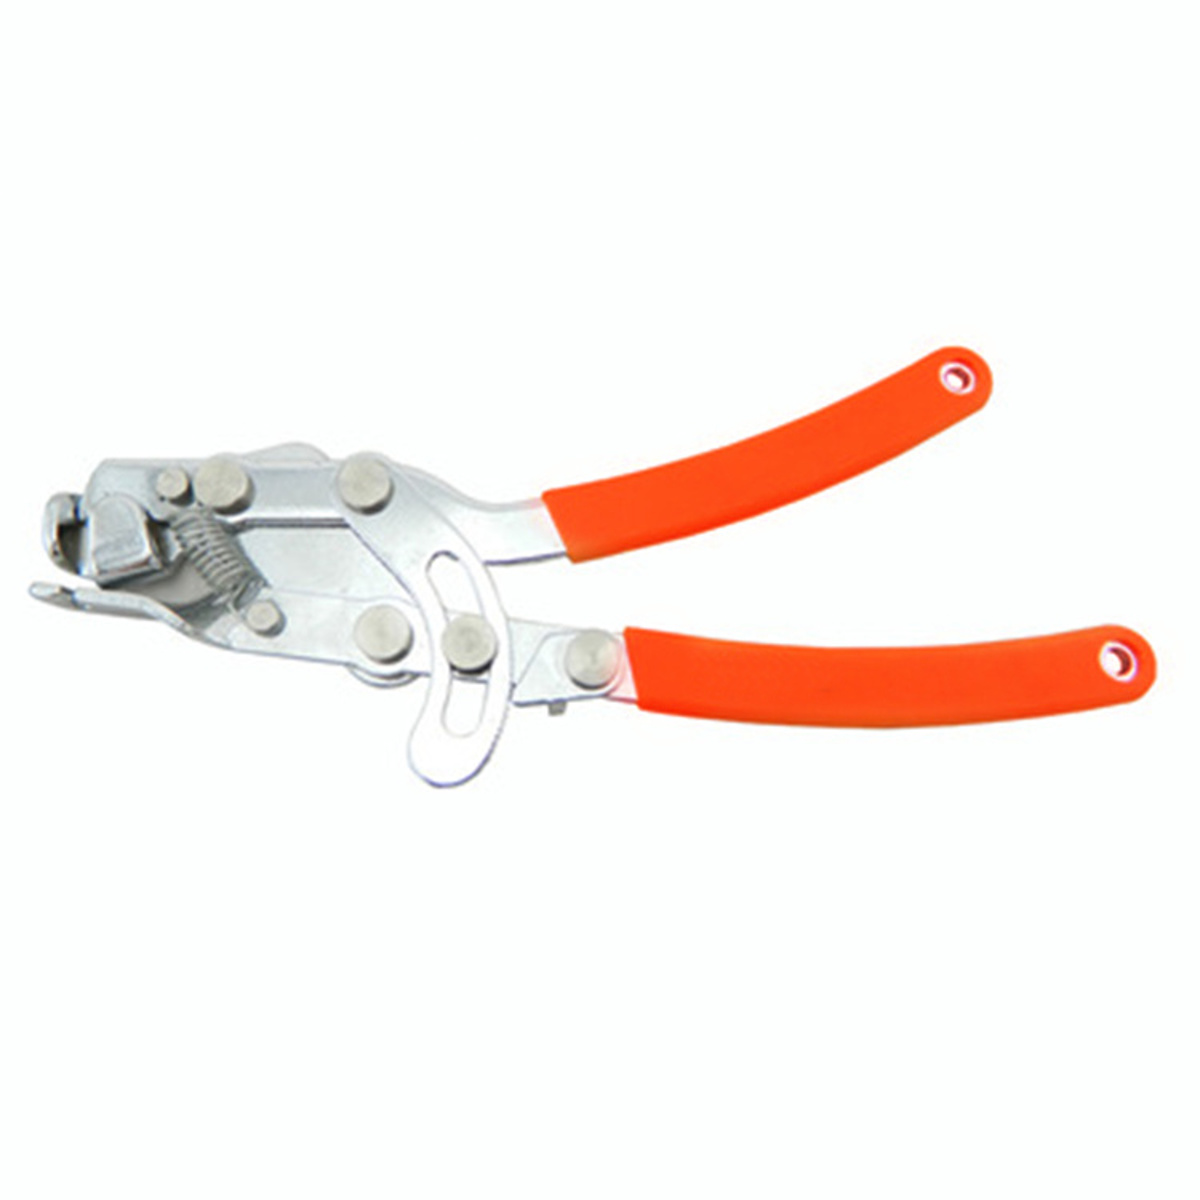 Bike-Bicycle-Brake-Gear-Inner-Cable-Puller-Brake-Cable-Stretcher-Hand-Pliers-Tool-1365430